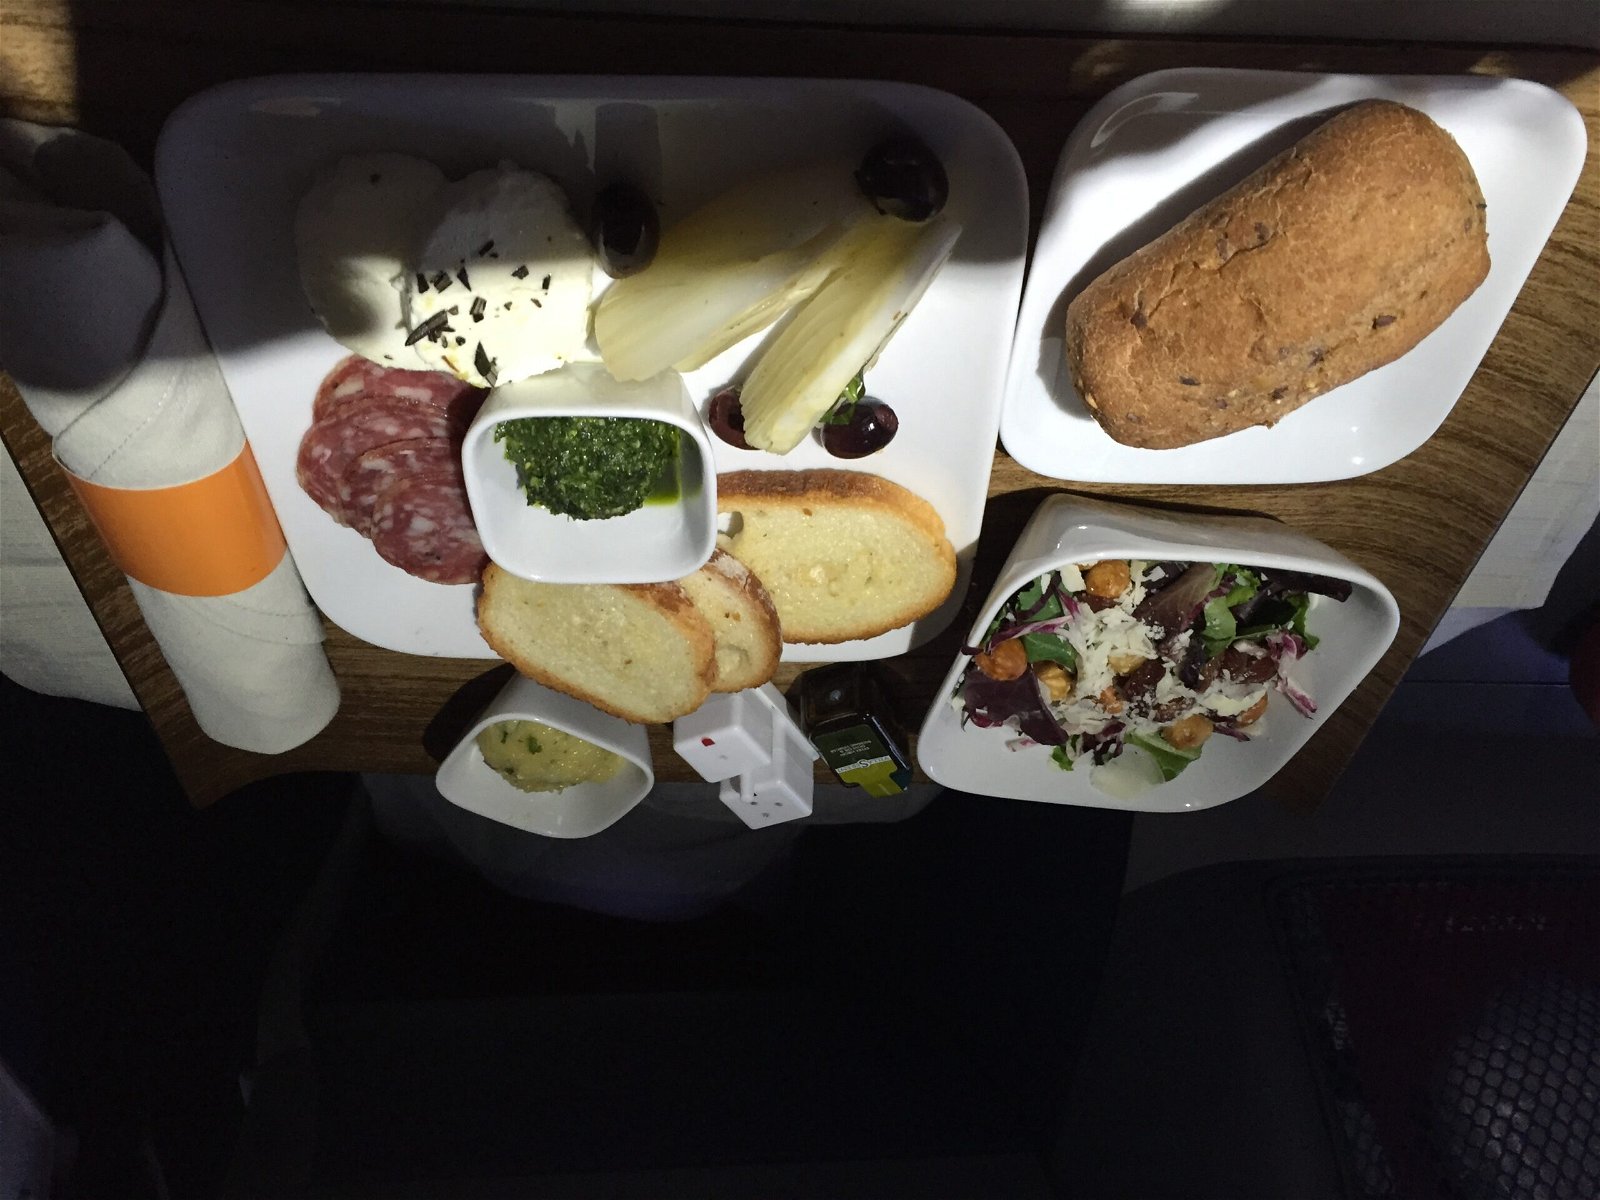 Delta One first course JFK-LAX